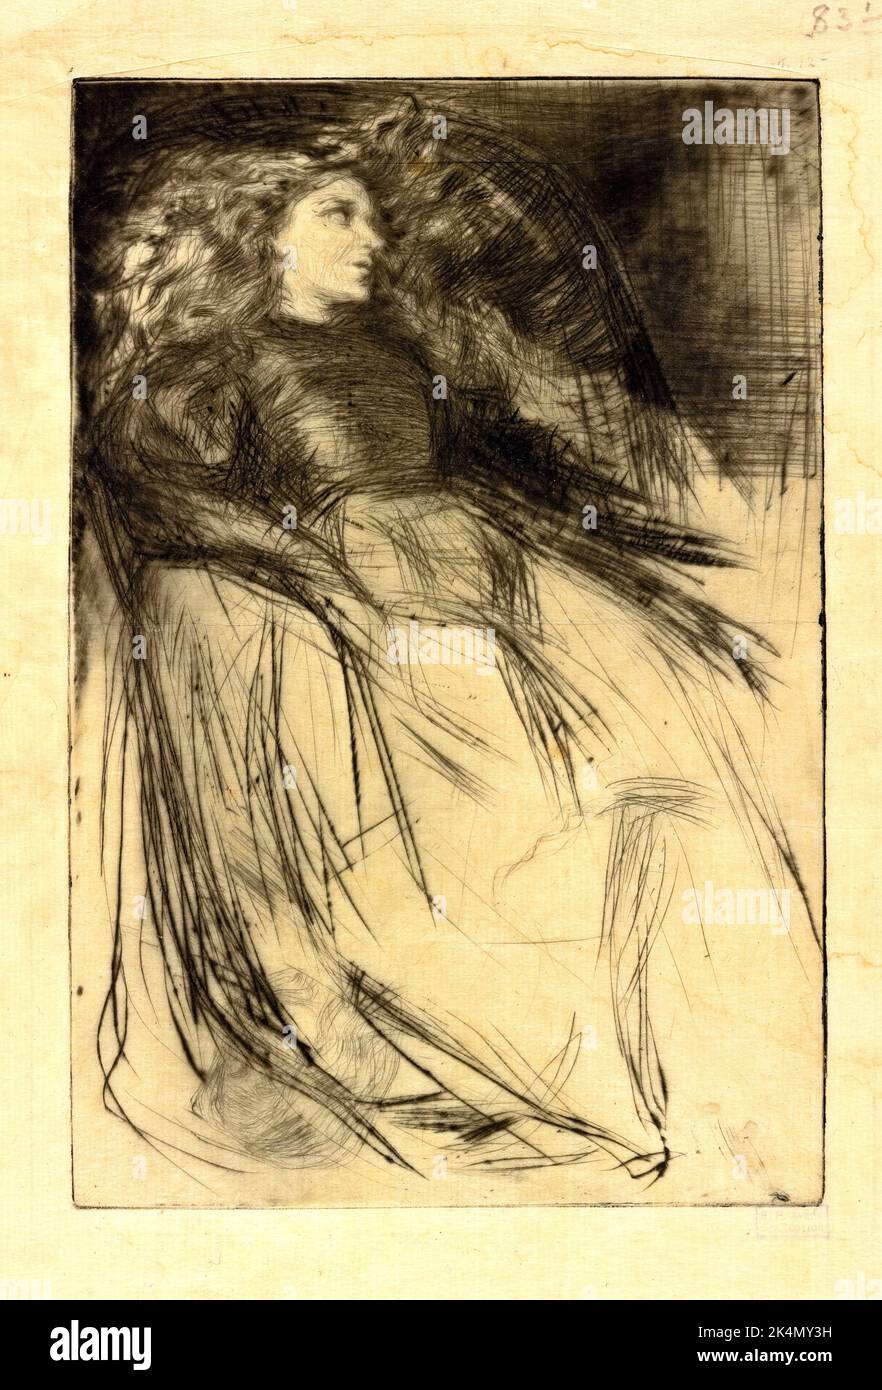 Weary. Avery, Samuel Putnam, 1822-1904 (Collector) Whistler, James McNeill (1834-1903) (Artist). Samuel Putnam Avery Collection James McNeill Stock Photo